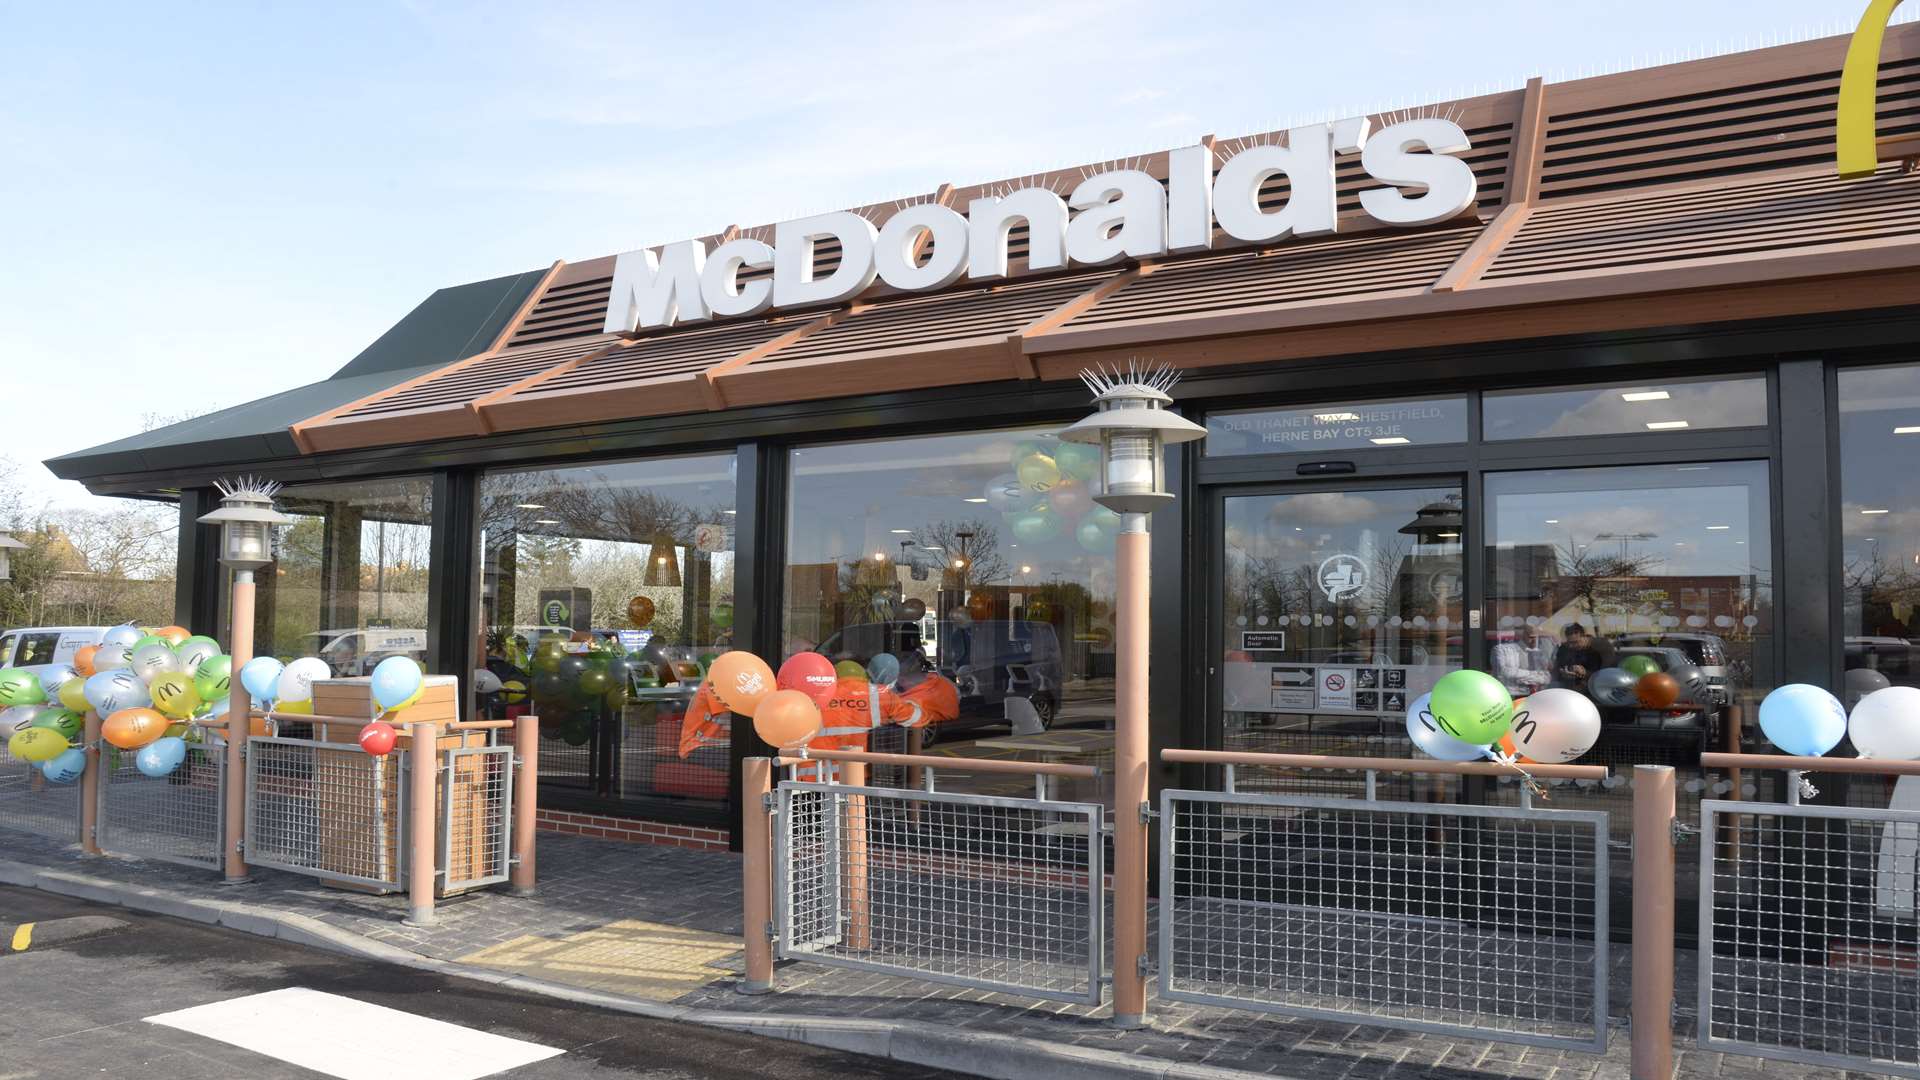 The McDonald's has been expanded and refurbished after being closed for six weeks.